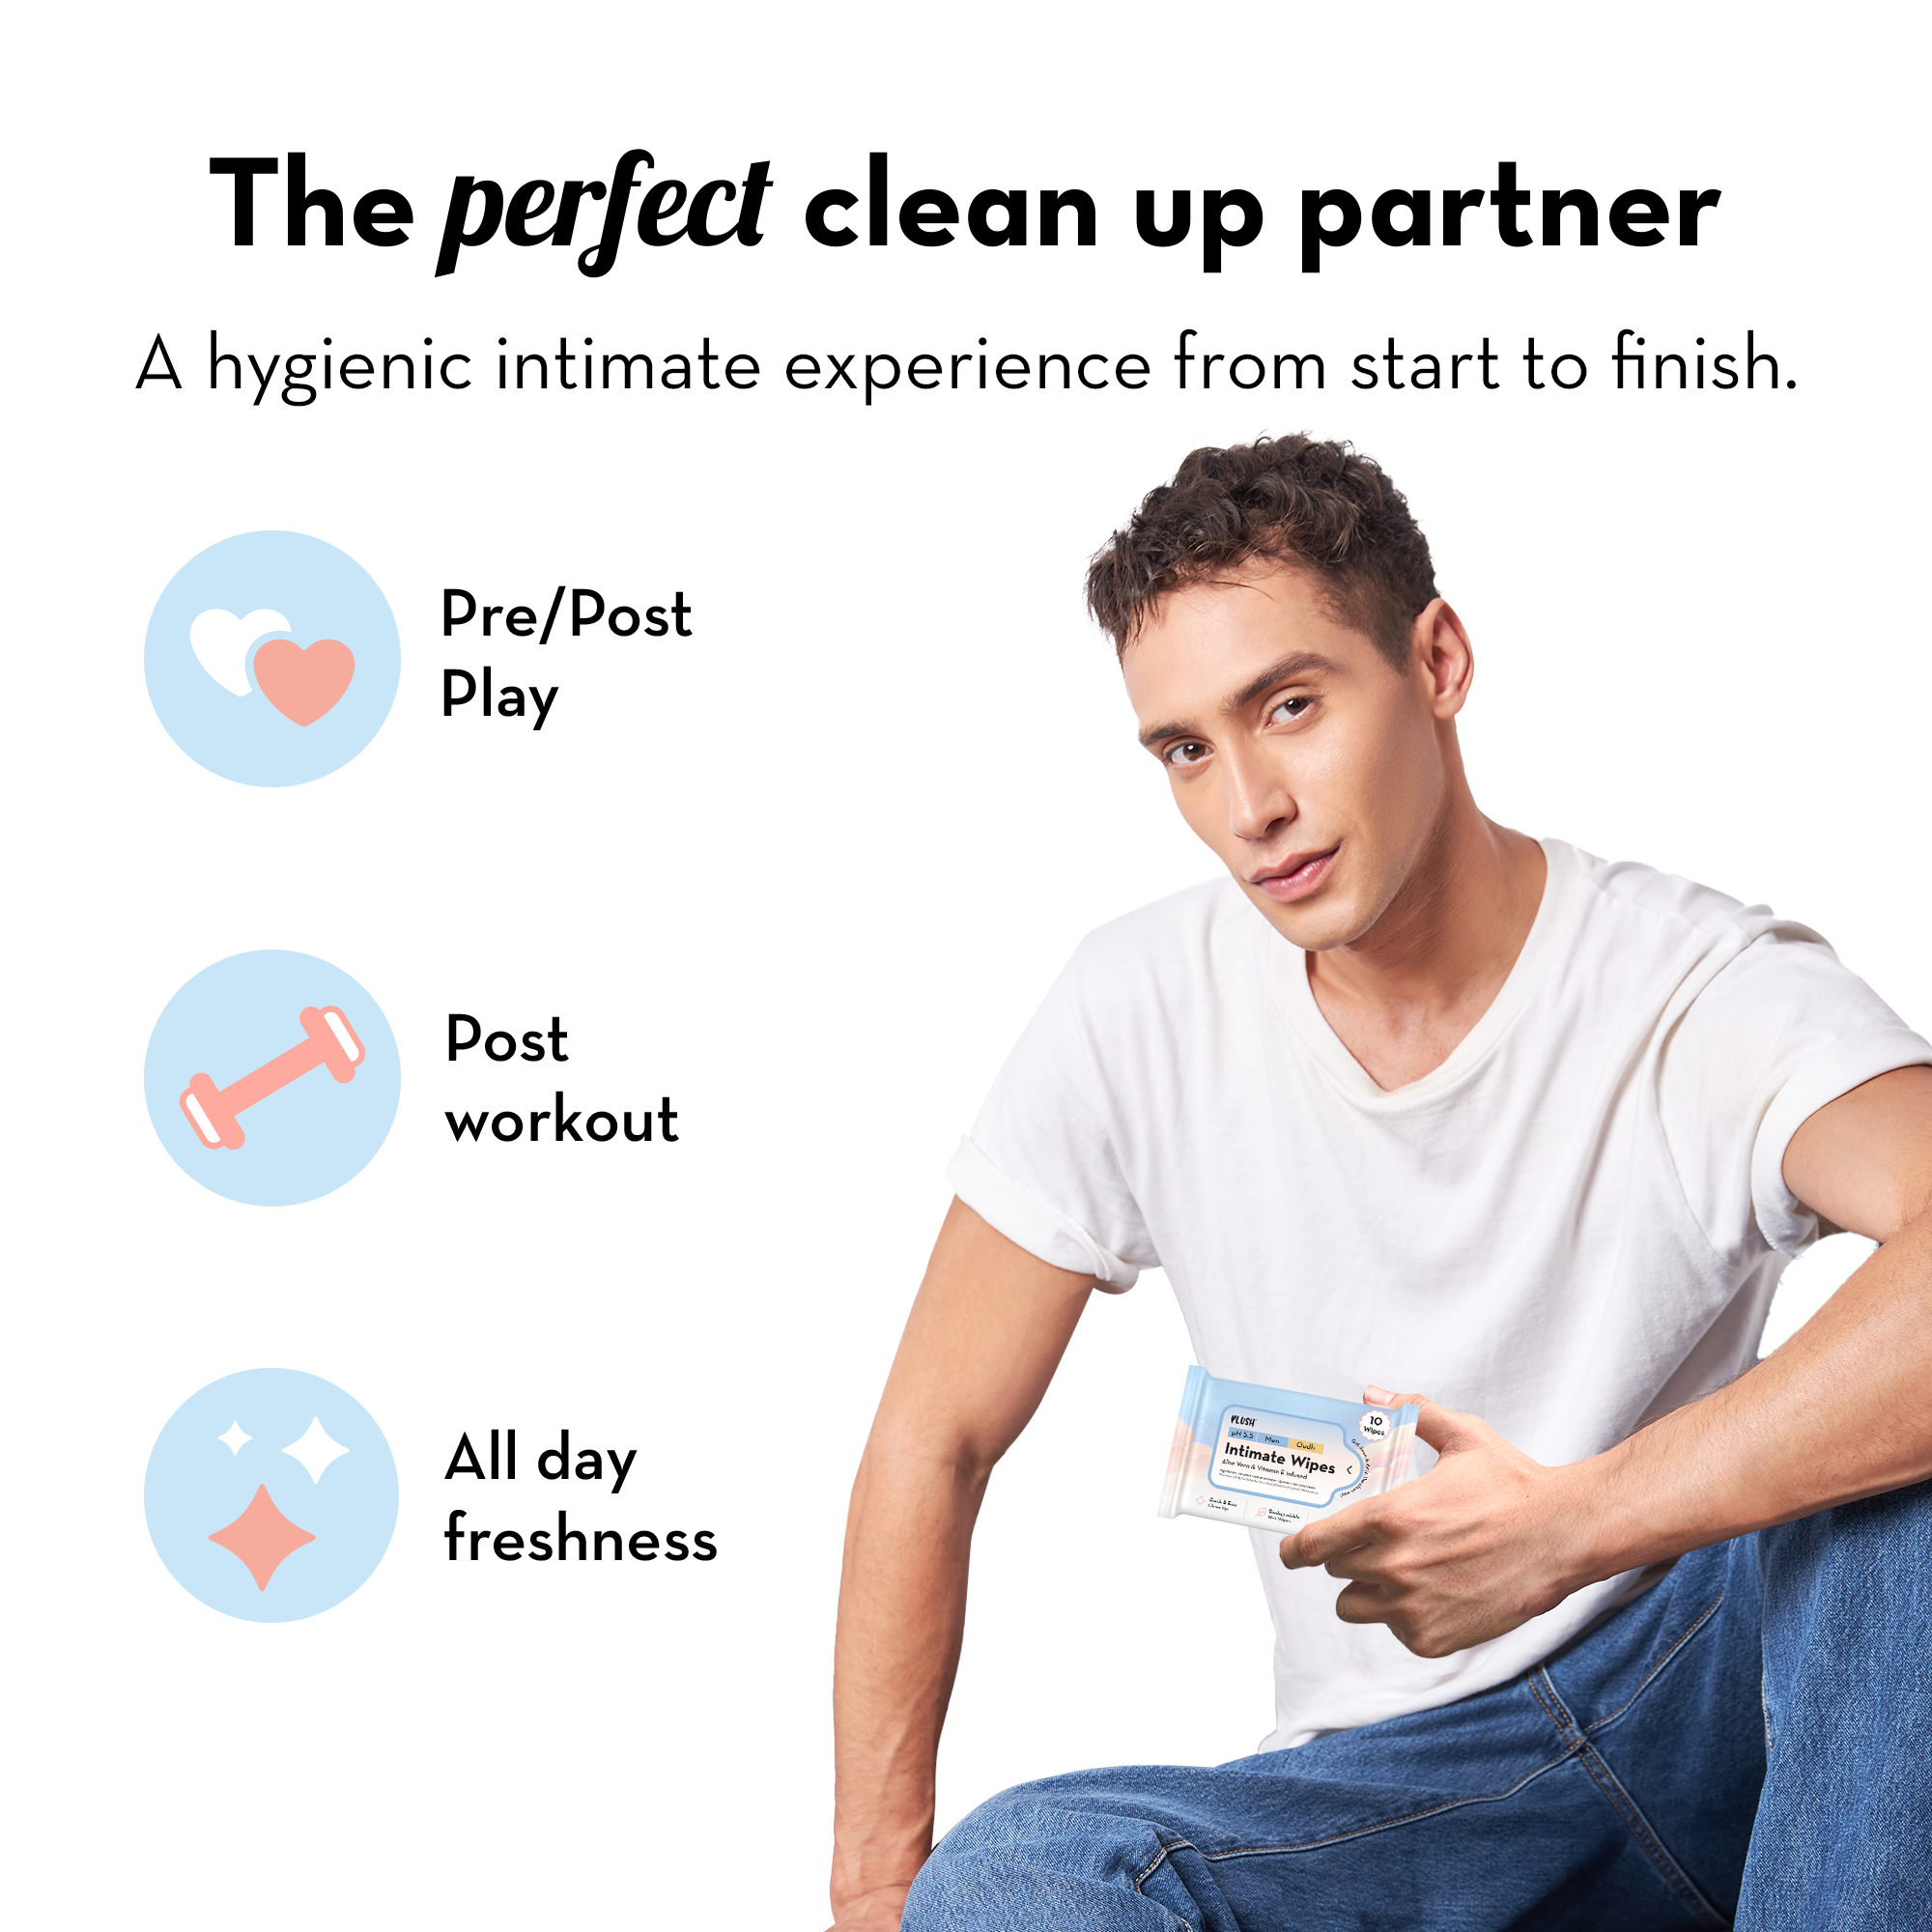 Play Intimate Wipes For Women & Men